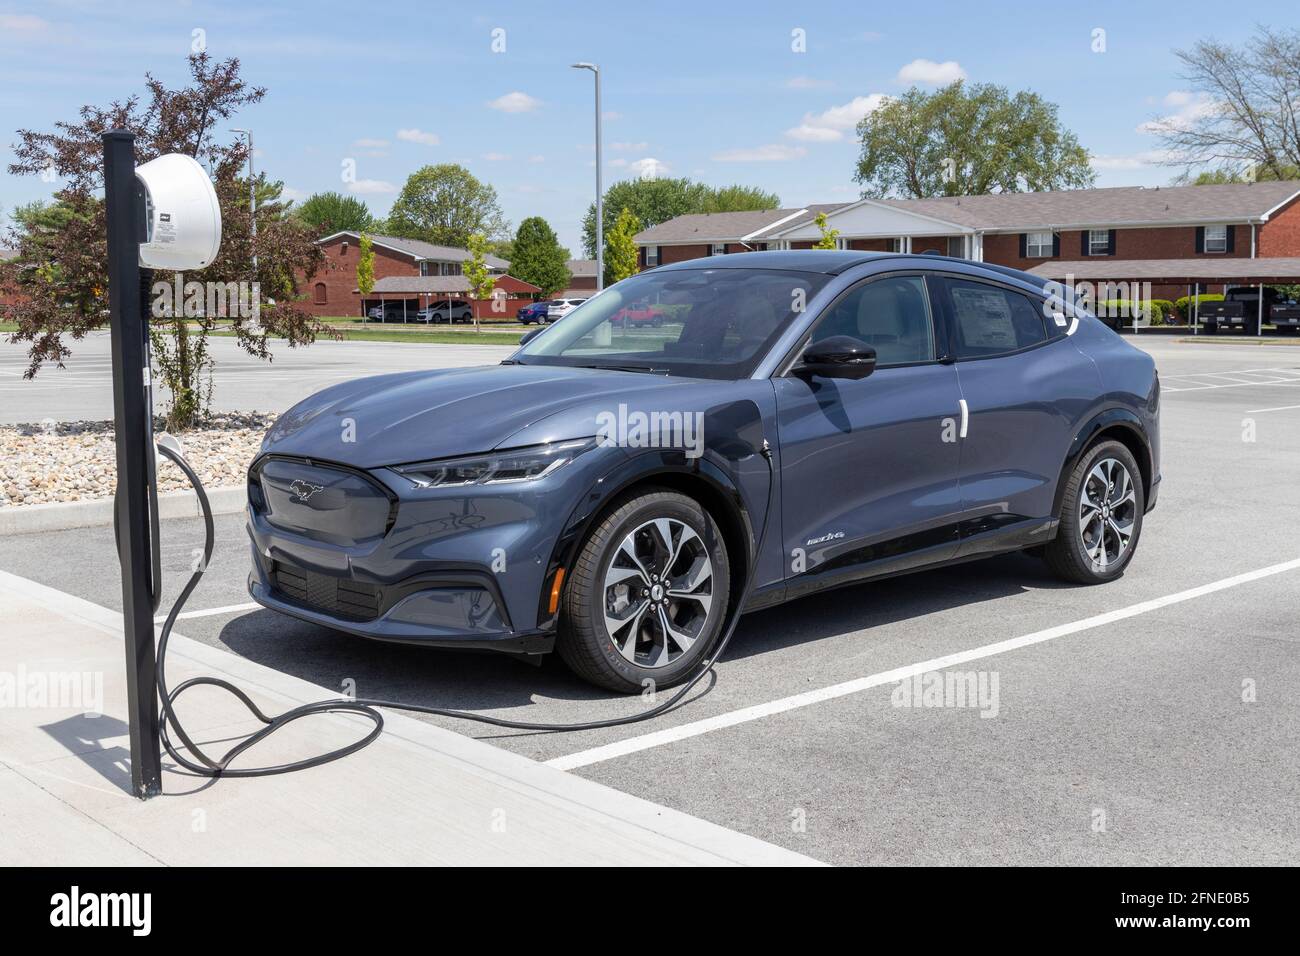 Kokomo Circa May 21 Ford Mustang Mach E Suv Display At A Charging Station The Mustang Mach E Is Ford S First All Electric Crossover And Has A Ra Stock Photo Alamy